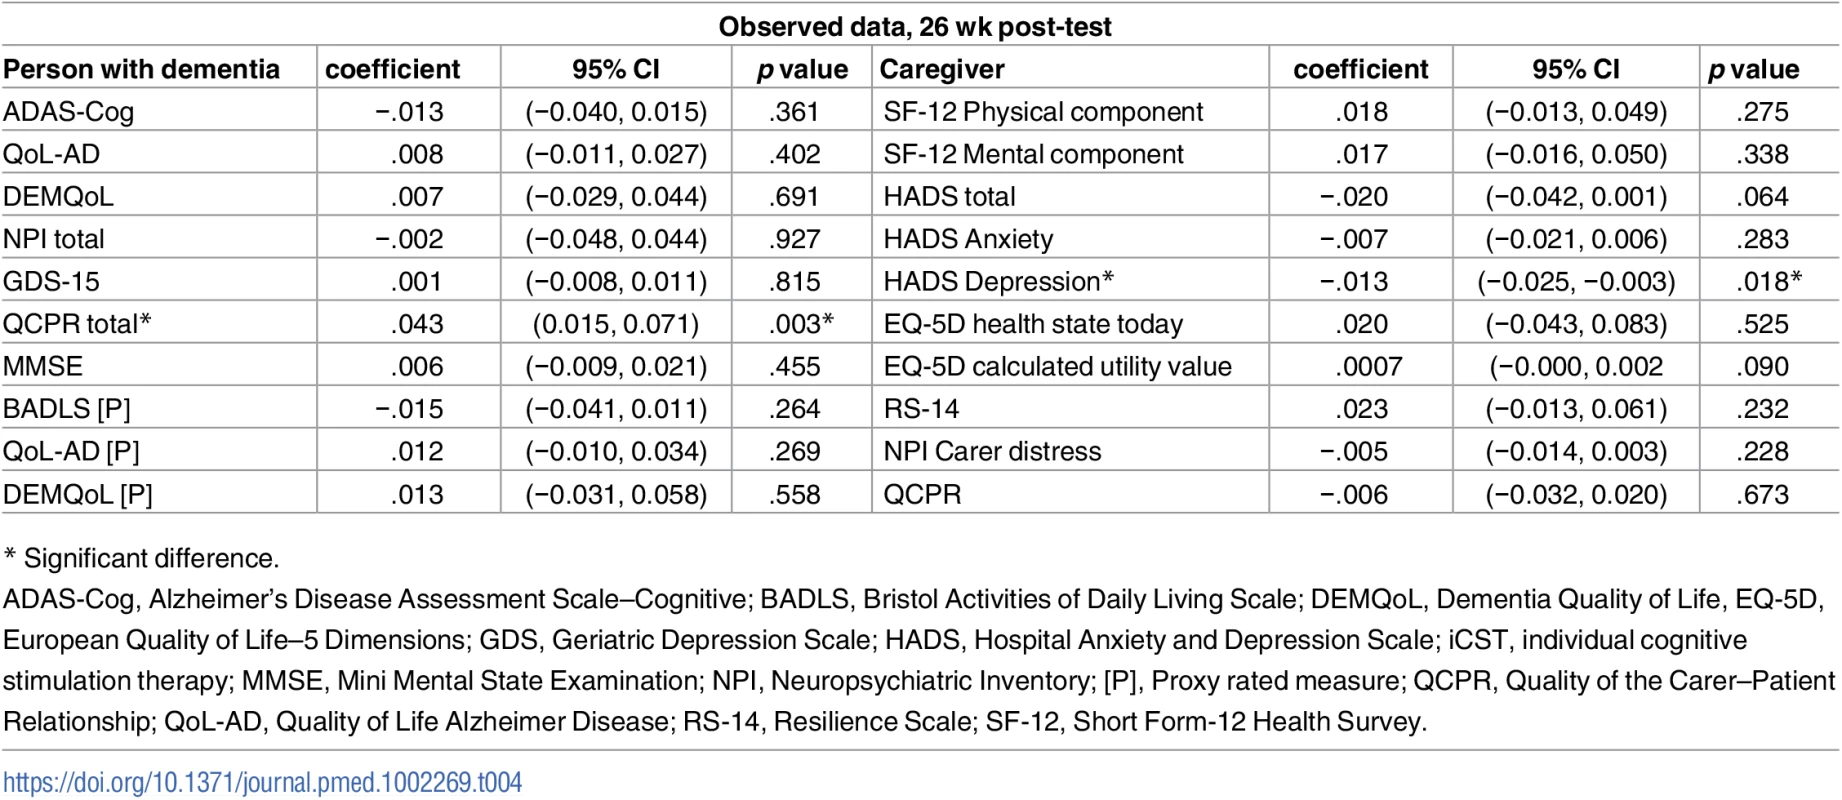 Regression of outcome measures at 26-wk post-test on the number of sessions of iCST attended, adjusting for BL outcome measures, marital status, centre, age, and anticholinesterase inhibitors.